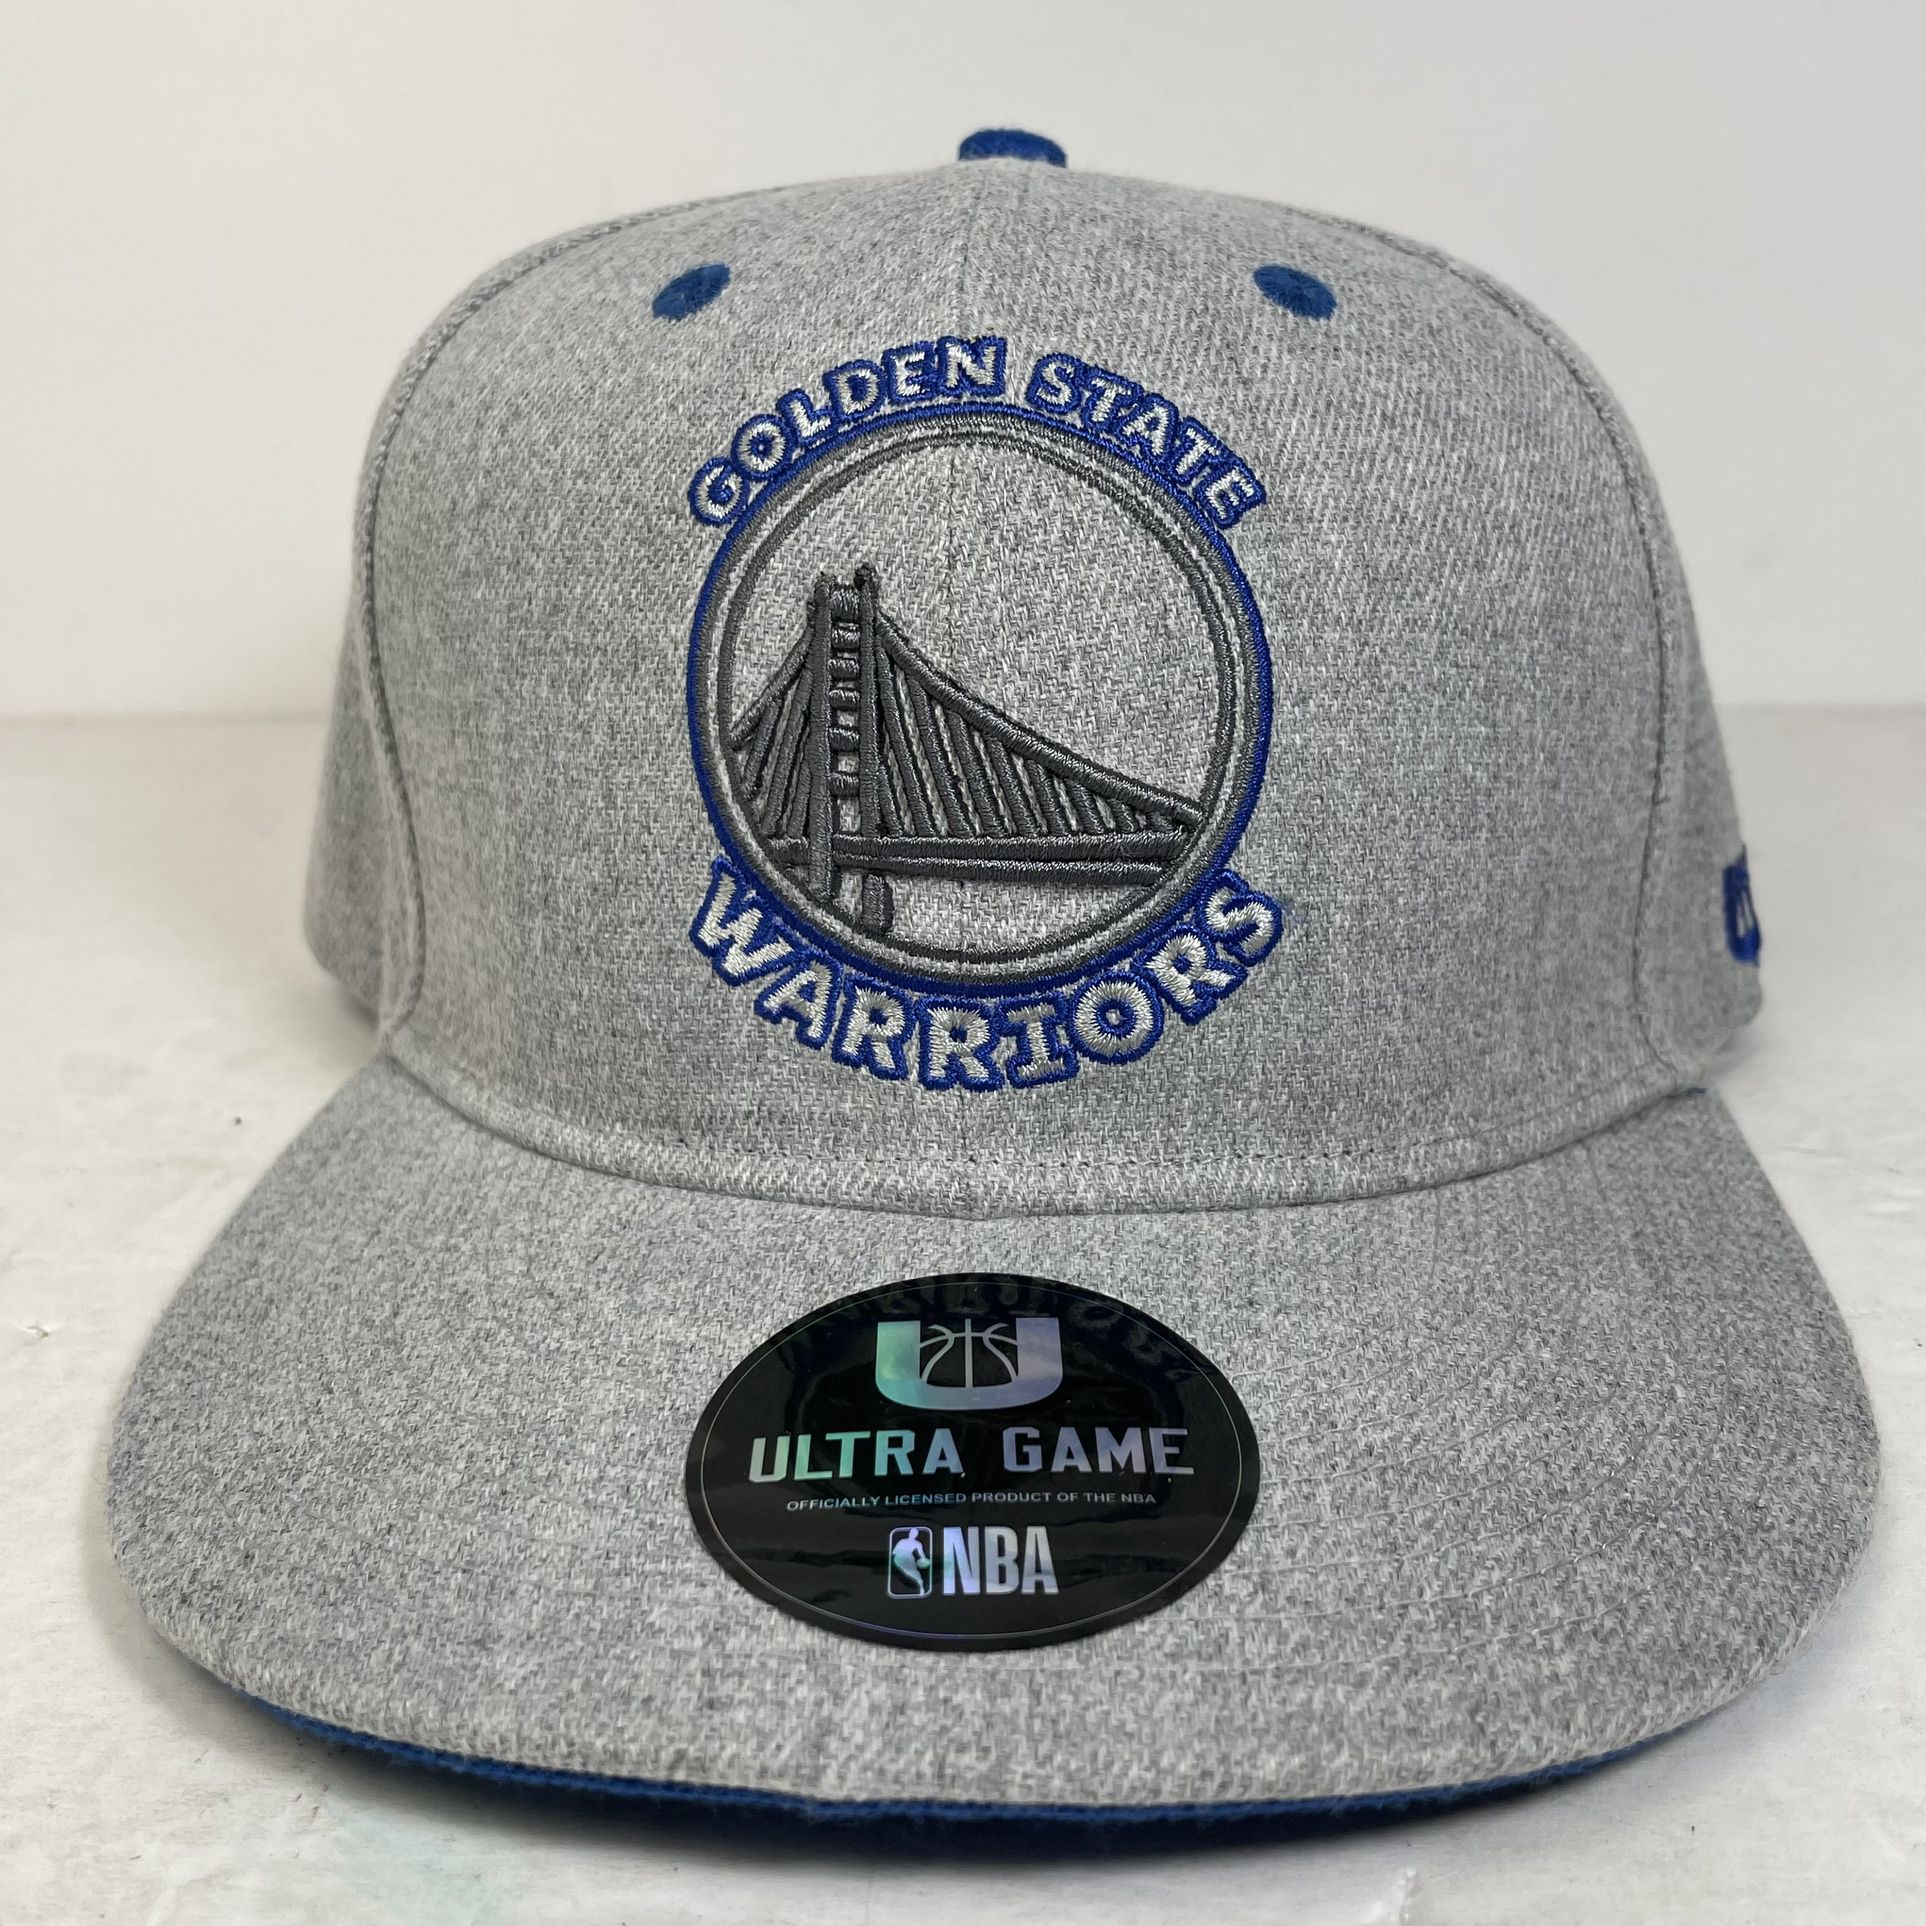 New Golden State Warriors Ultra Game Snapback Adjustable Hat Gray GSW for  Sale in Sacramento, CA - OfferUp